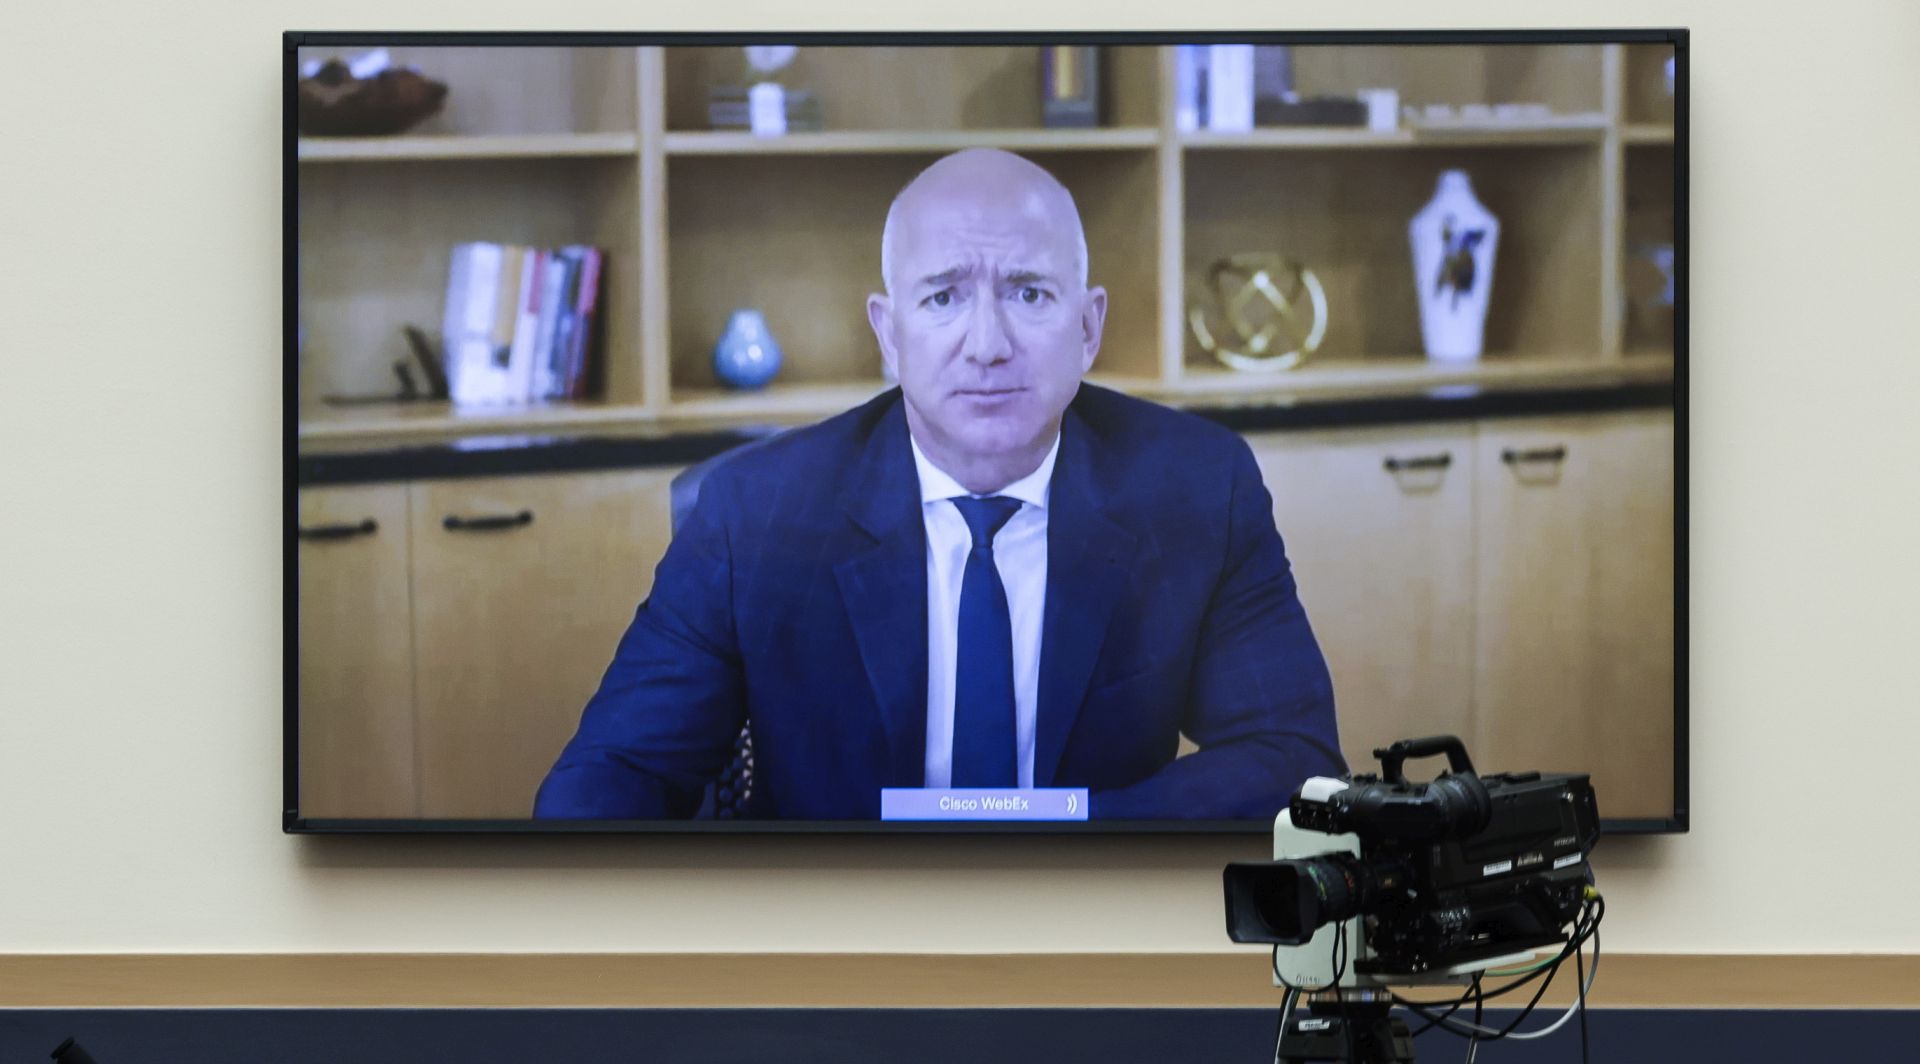 epa08573481 Amazon CEO Jeff Bezos testifies via video conference during a House Judiciary Subcommittee on Antitrust, Commercial and Administrative Law on 'Online Platforms and Market Power' in the Rayburn House office Building on Capitol Hill in Washington, DC, USA, on 29 July 2020.  EPA/Graeme Jennings / POOL